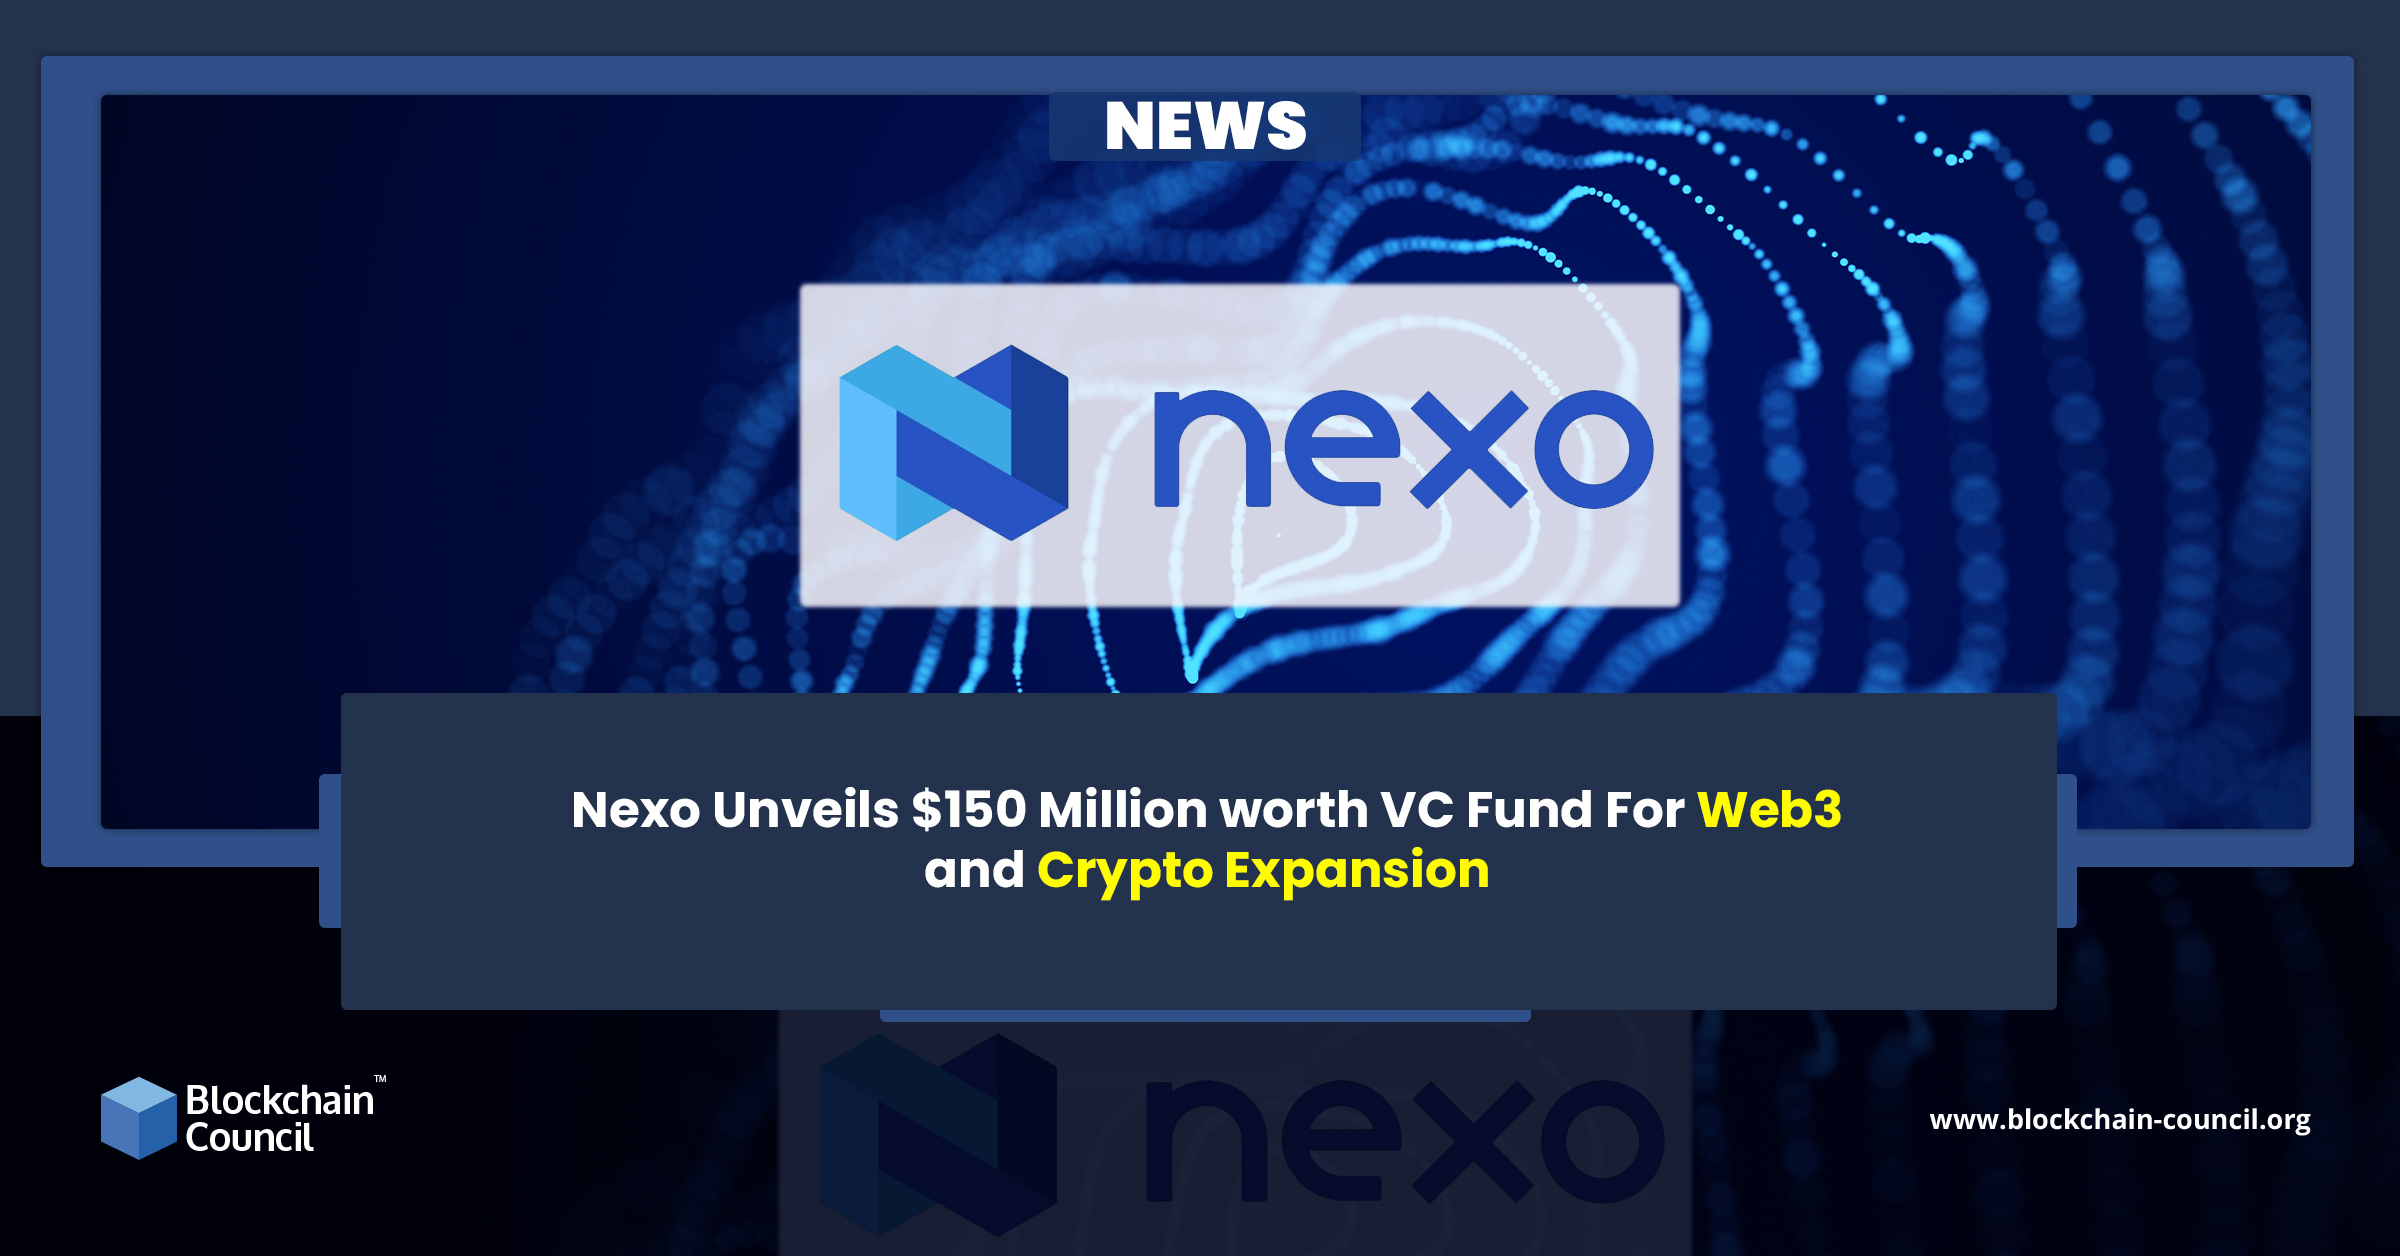 Nexo Unveils $150 Million worth VC Fund For Web3 and Crypto Expansion news